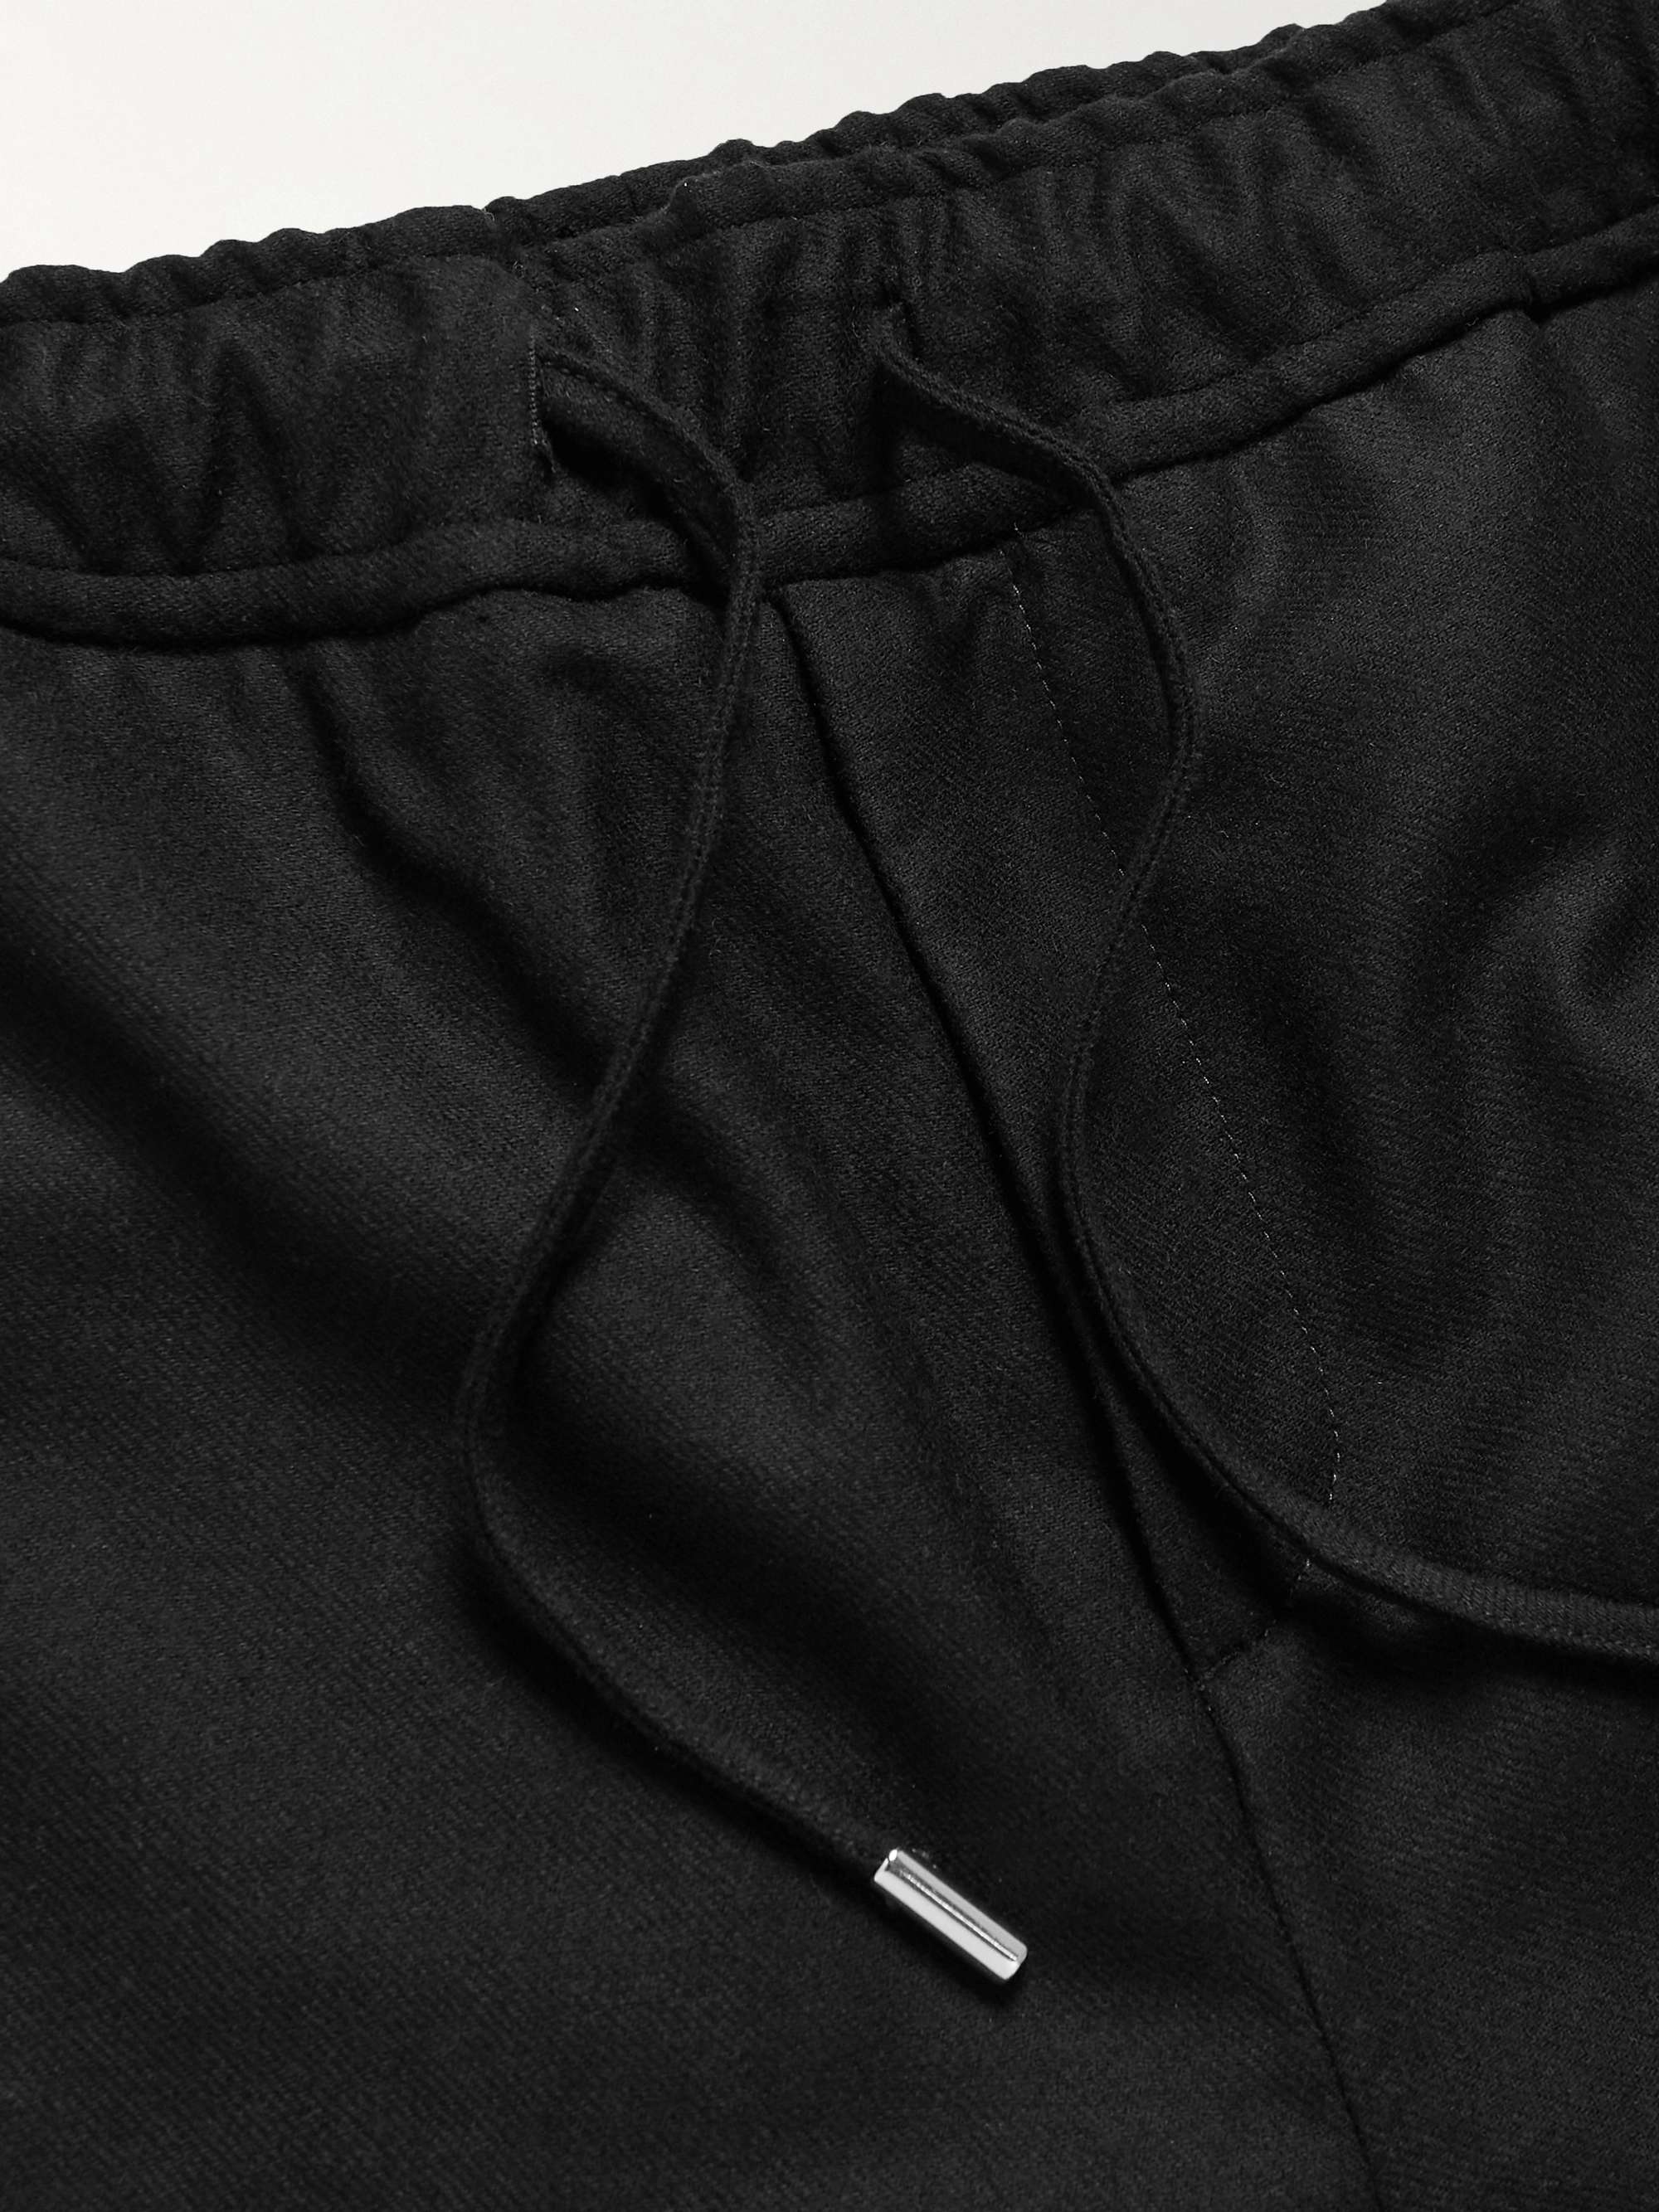 MR P. Tapered Virgin Wool and Cashmere-Blend Drawstring Trousers